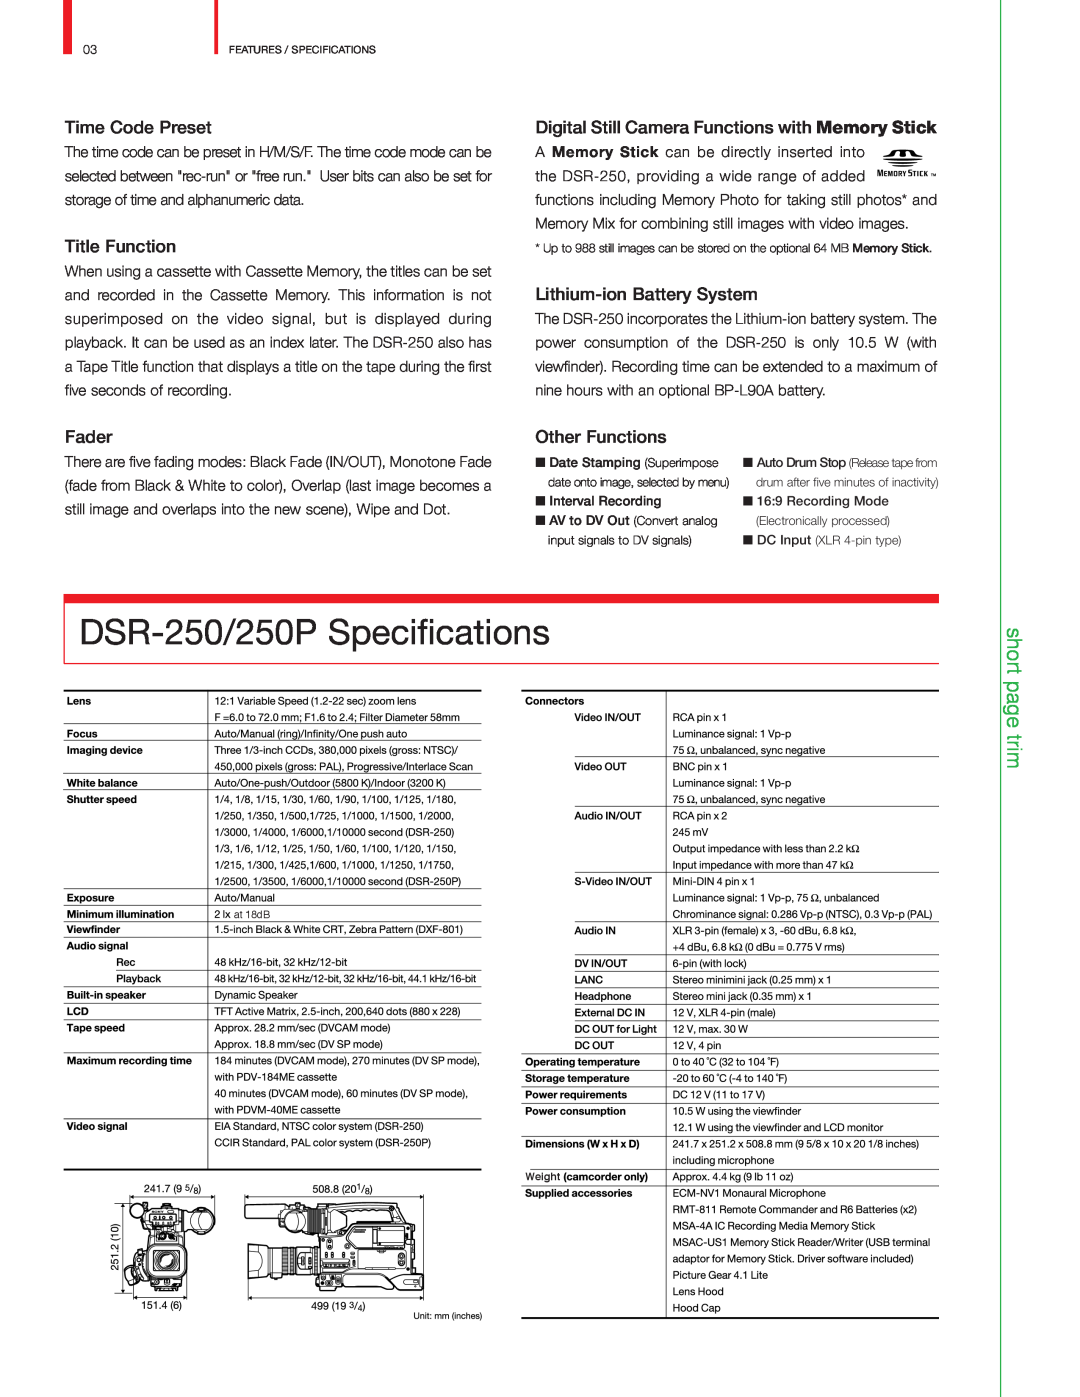 Sony DSR-250/250P Specifications, short, page trim, Time Code Preset, Title Function, Lithium-ion Battery System, Fader 